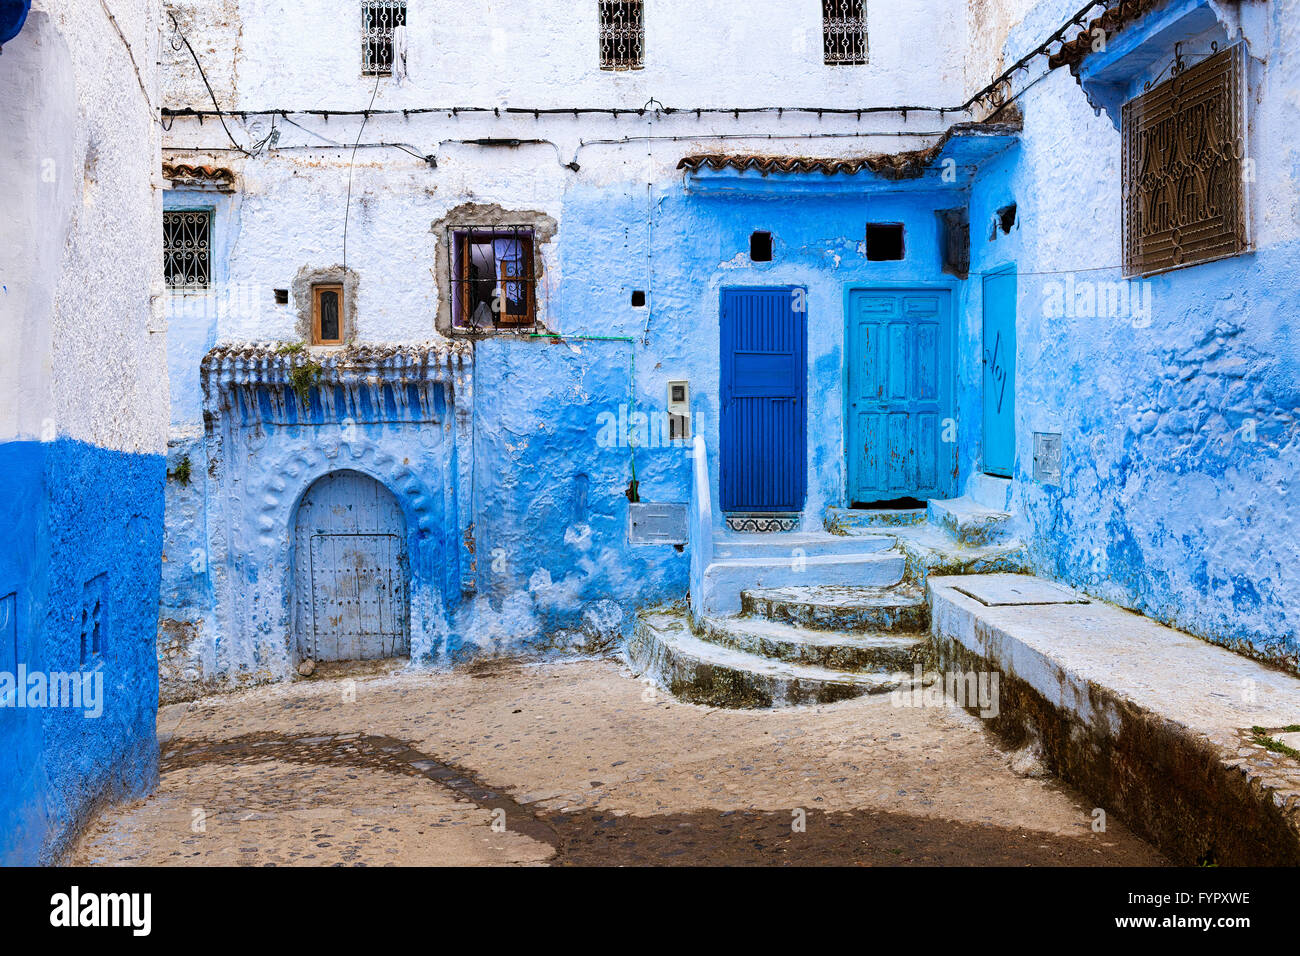 View of a street in the town of Chefchaouen in Morocco Stock Photo